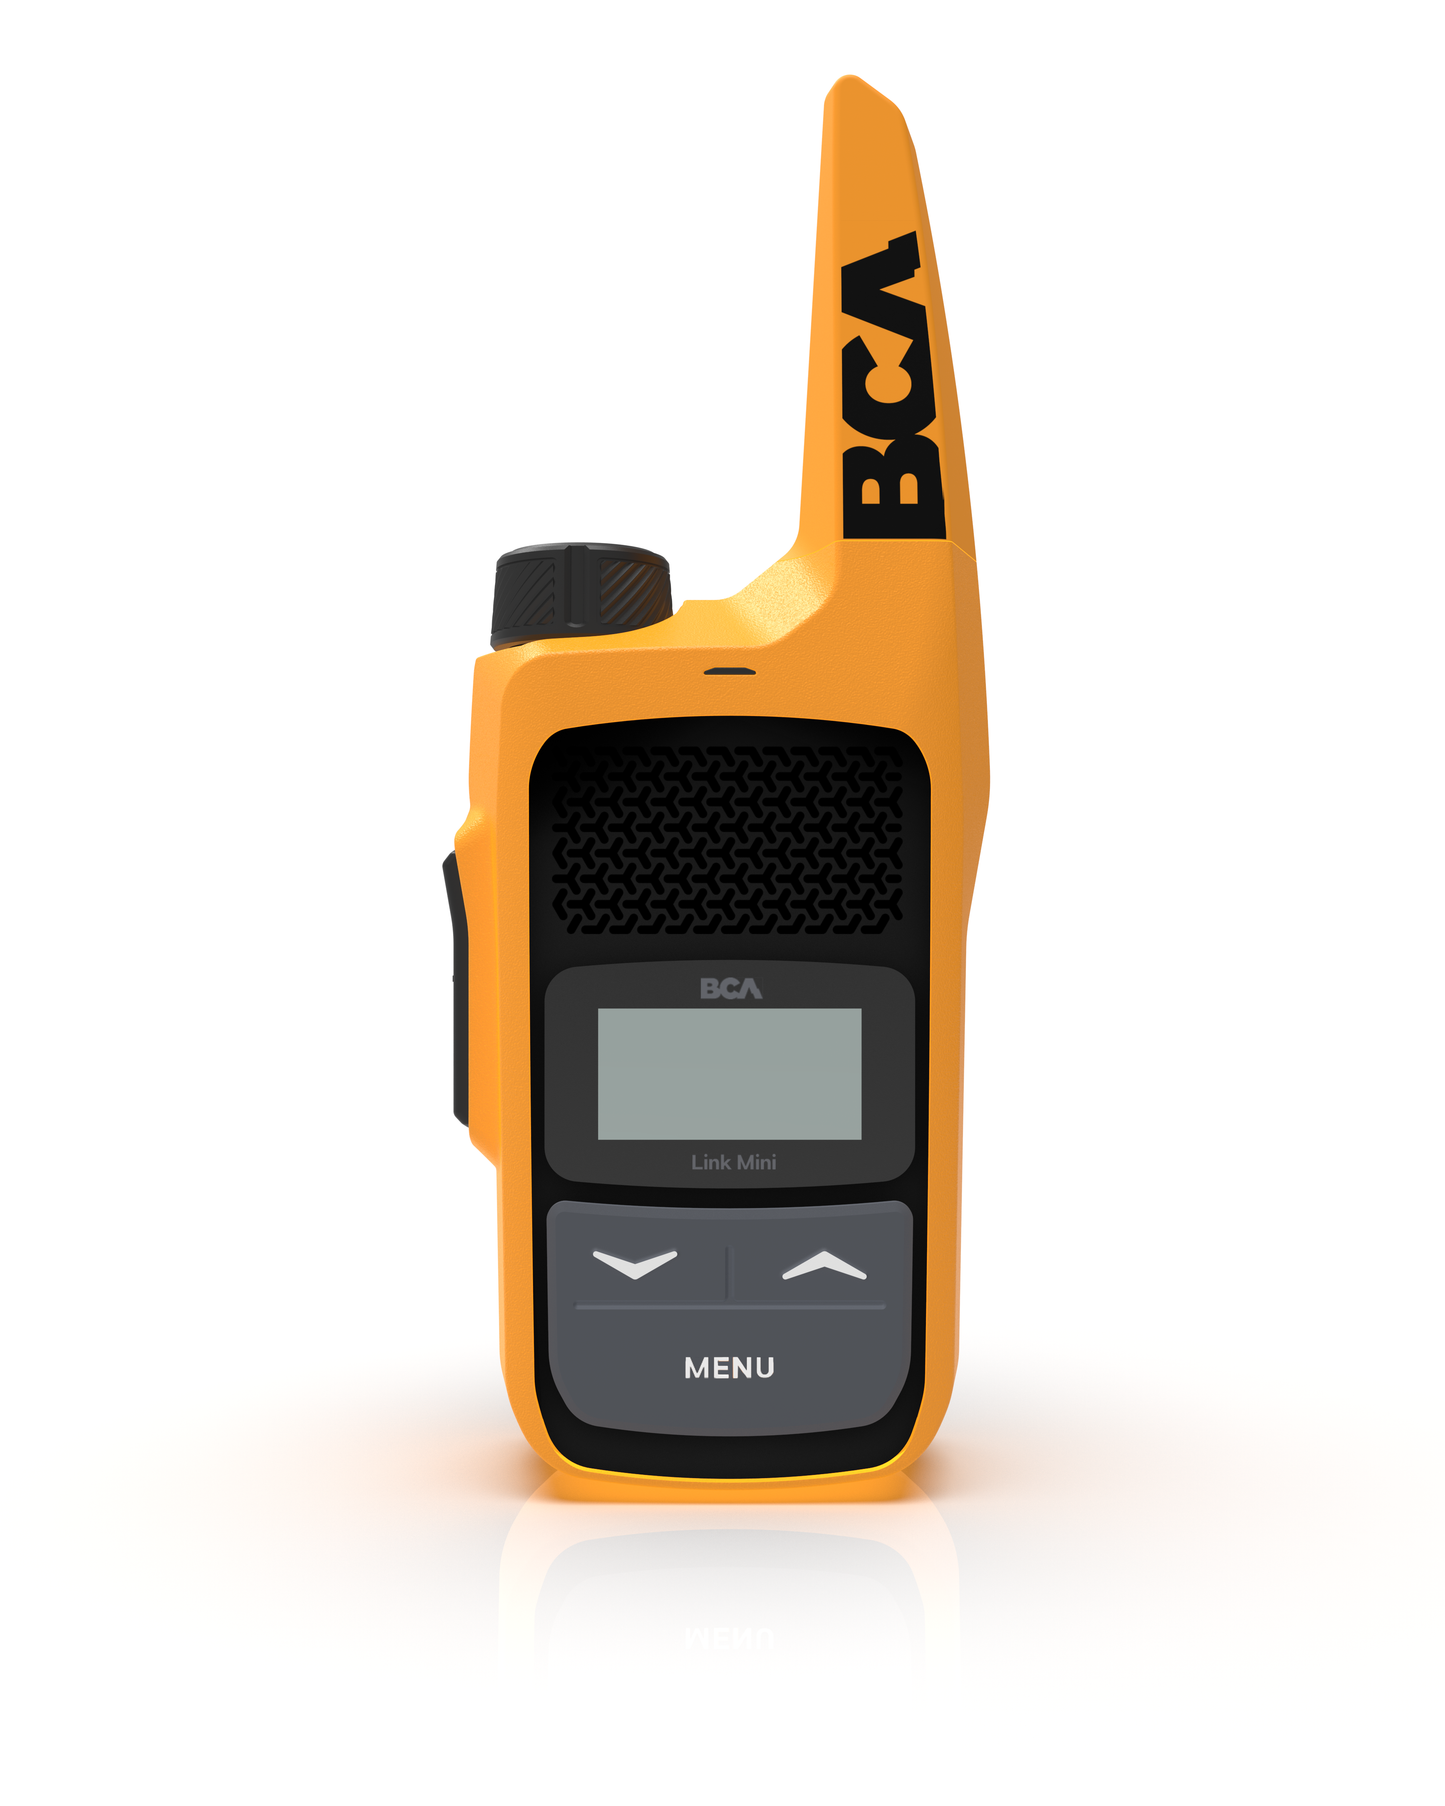 Pair of BCA Link Mini Two-Way Winter Sport Walkie Talkie Radio - UK/EU Version - - SOLD OUT - NEXT STOCK DUE END OF MARCH